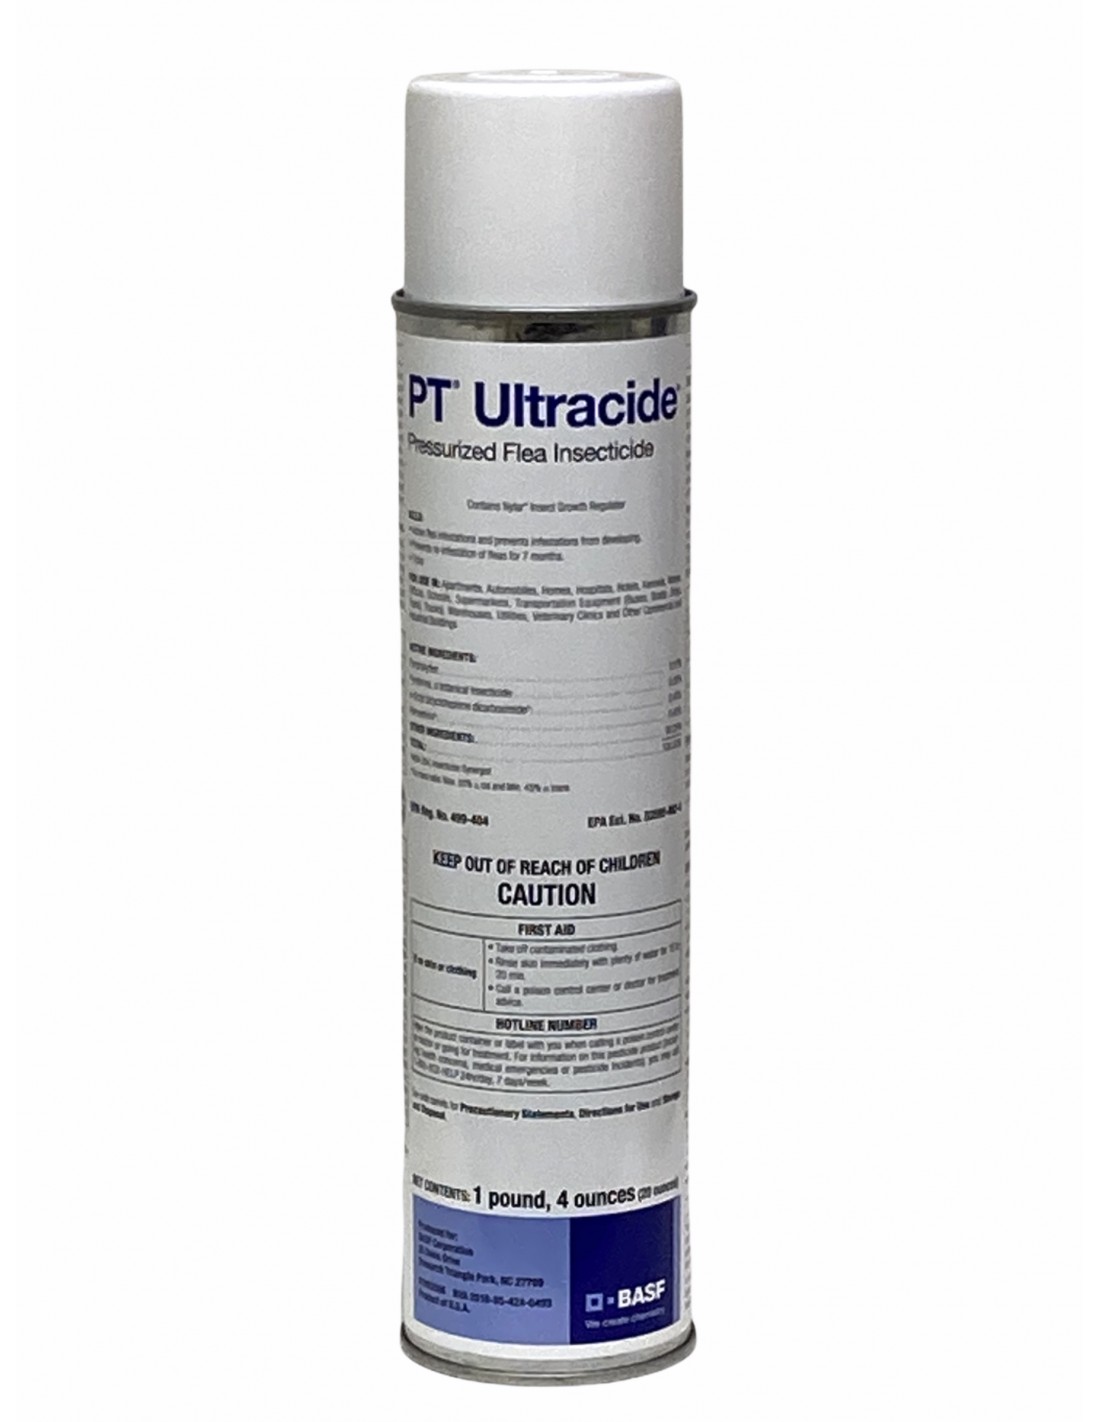 PT Ultracide Pressurized Flea IGR and Adulticide Carpet Spray Questions & Answers